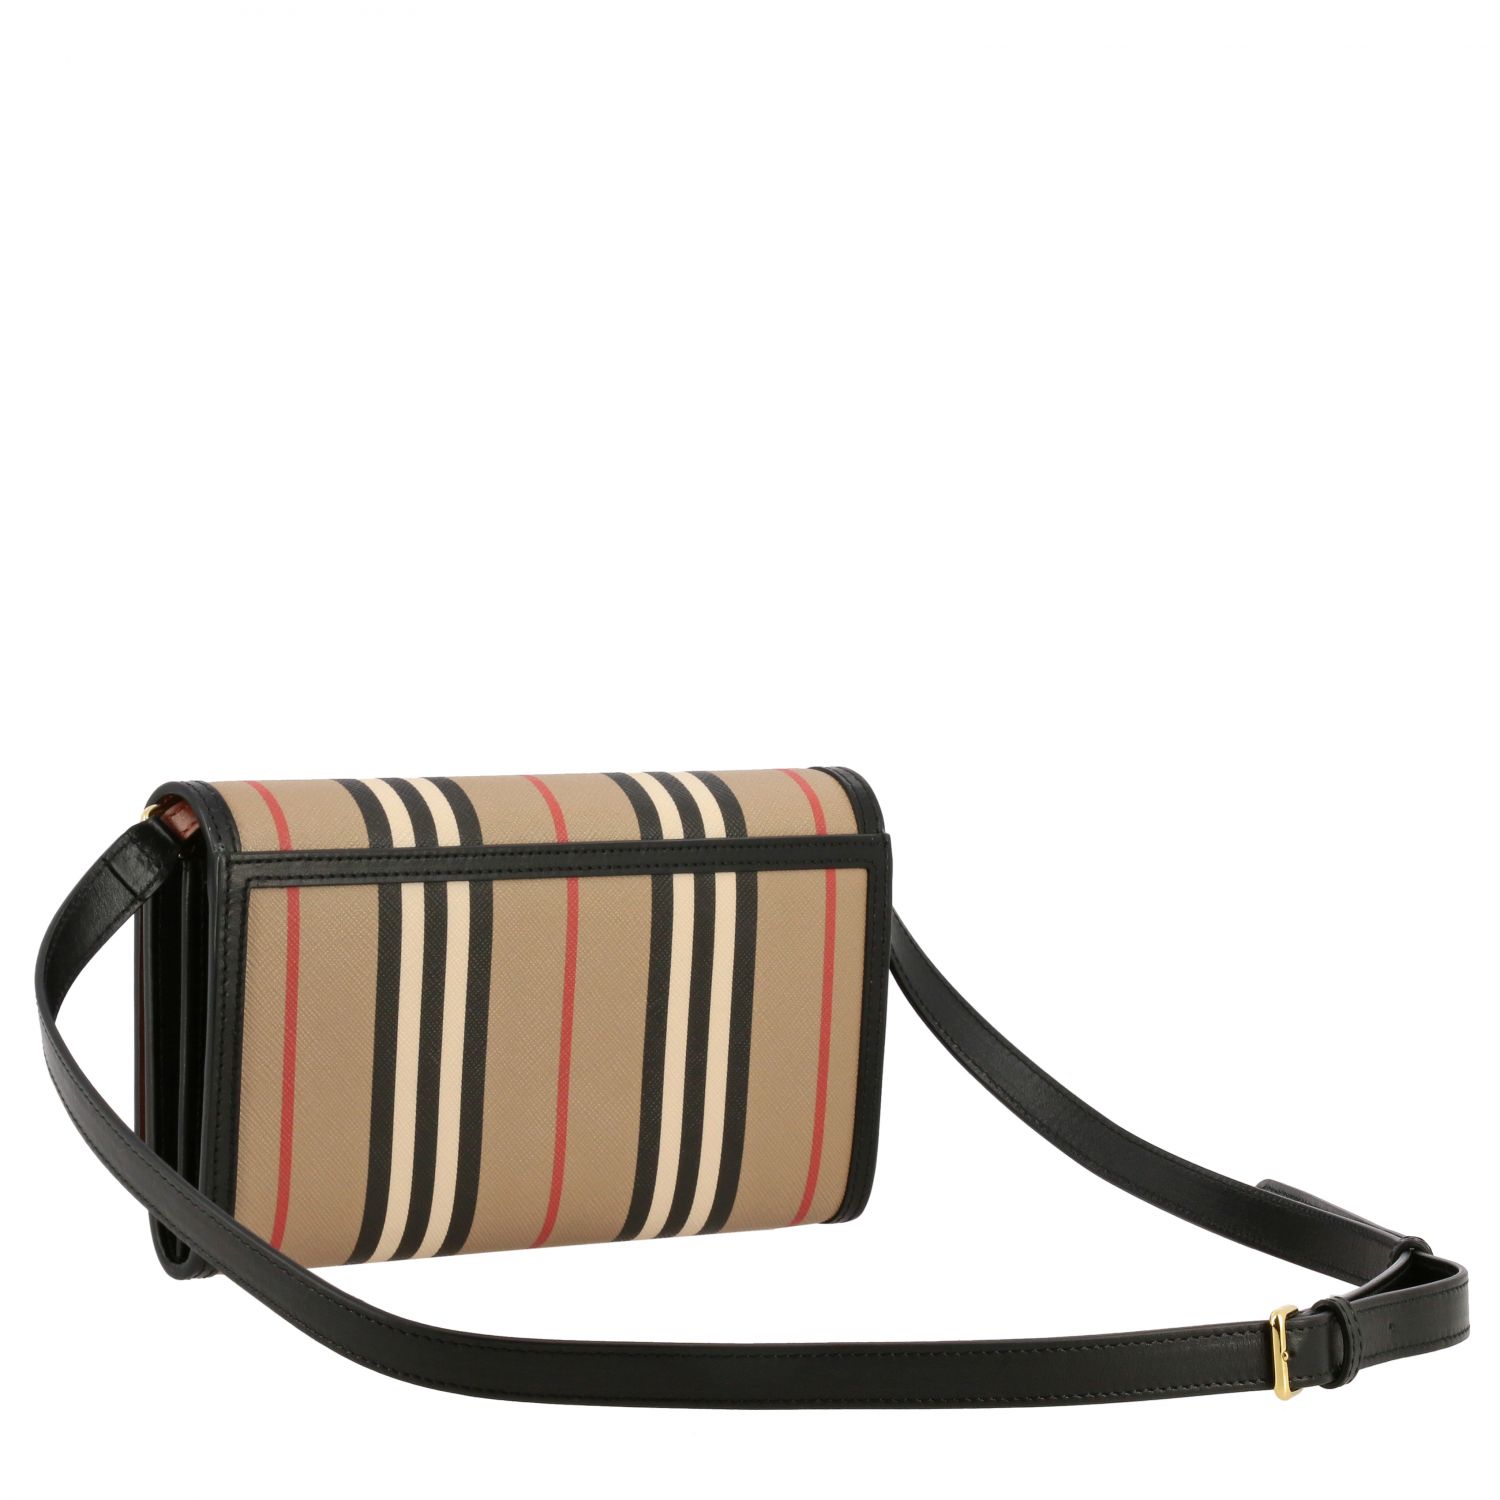 Burberry Outlet: Hannah shoulder bag in vintage check leather - Beige Burberry mini bag 8026004 at GIGLIO.COM